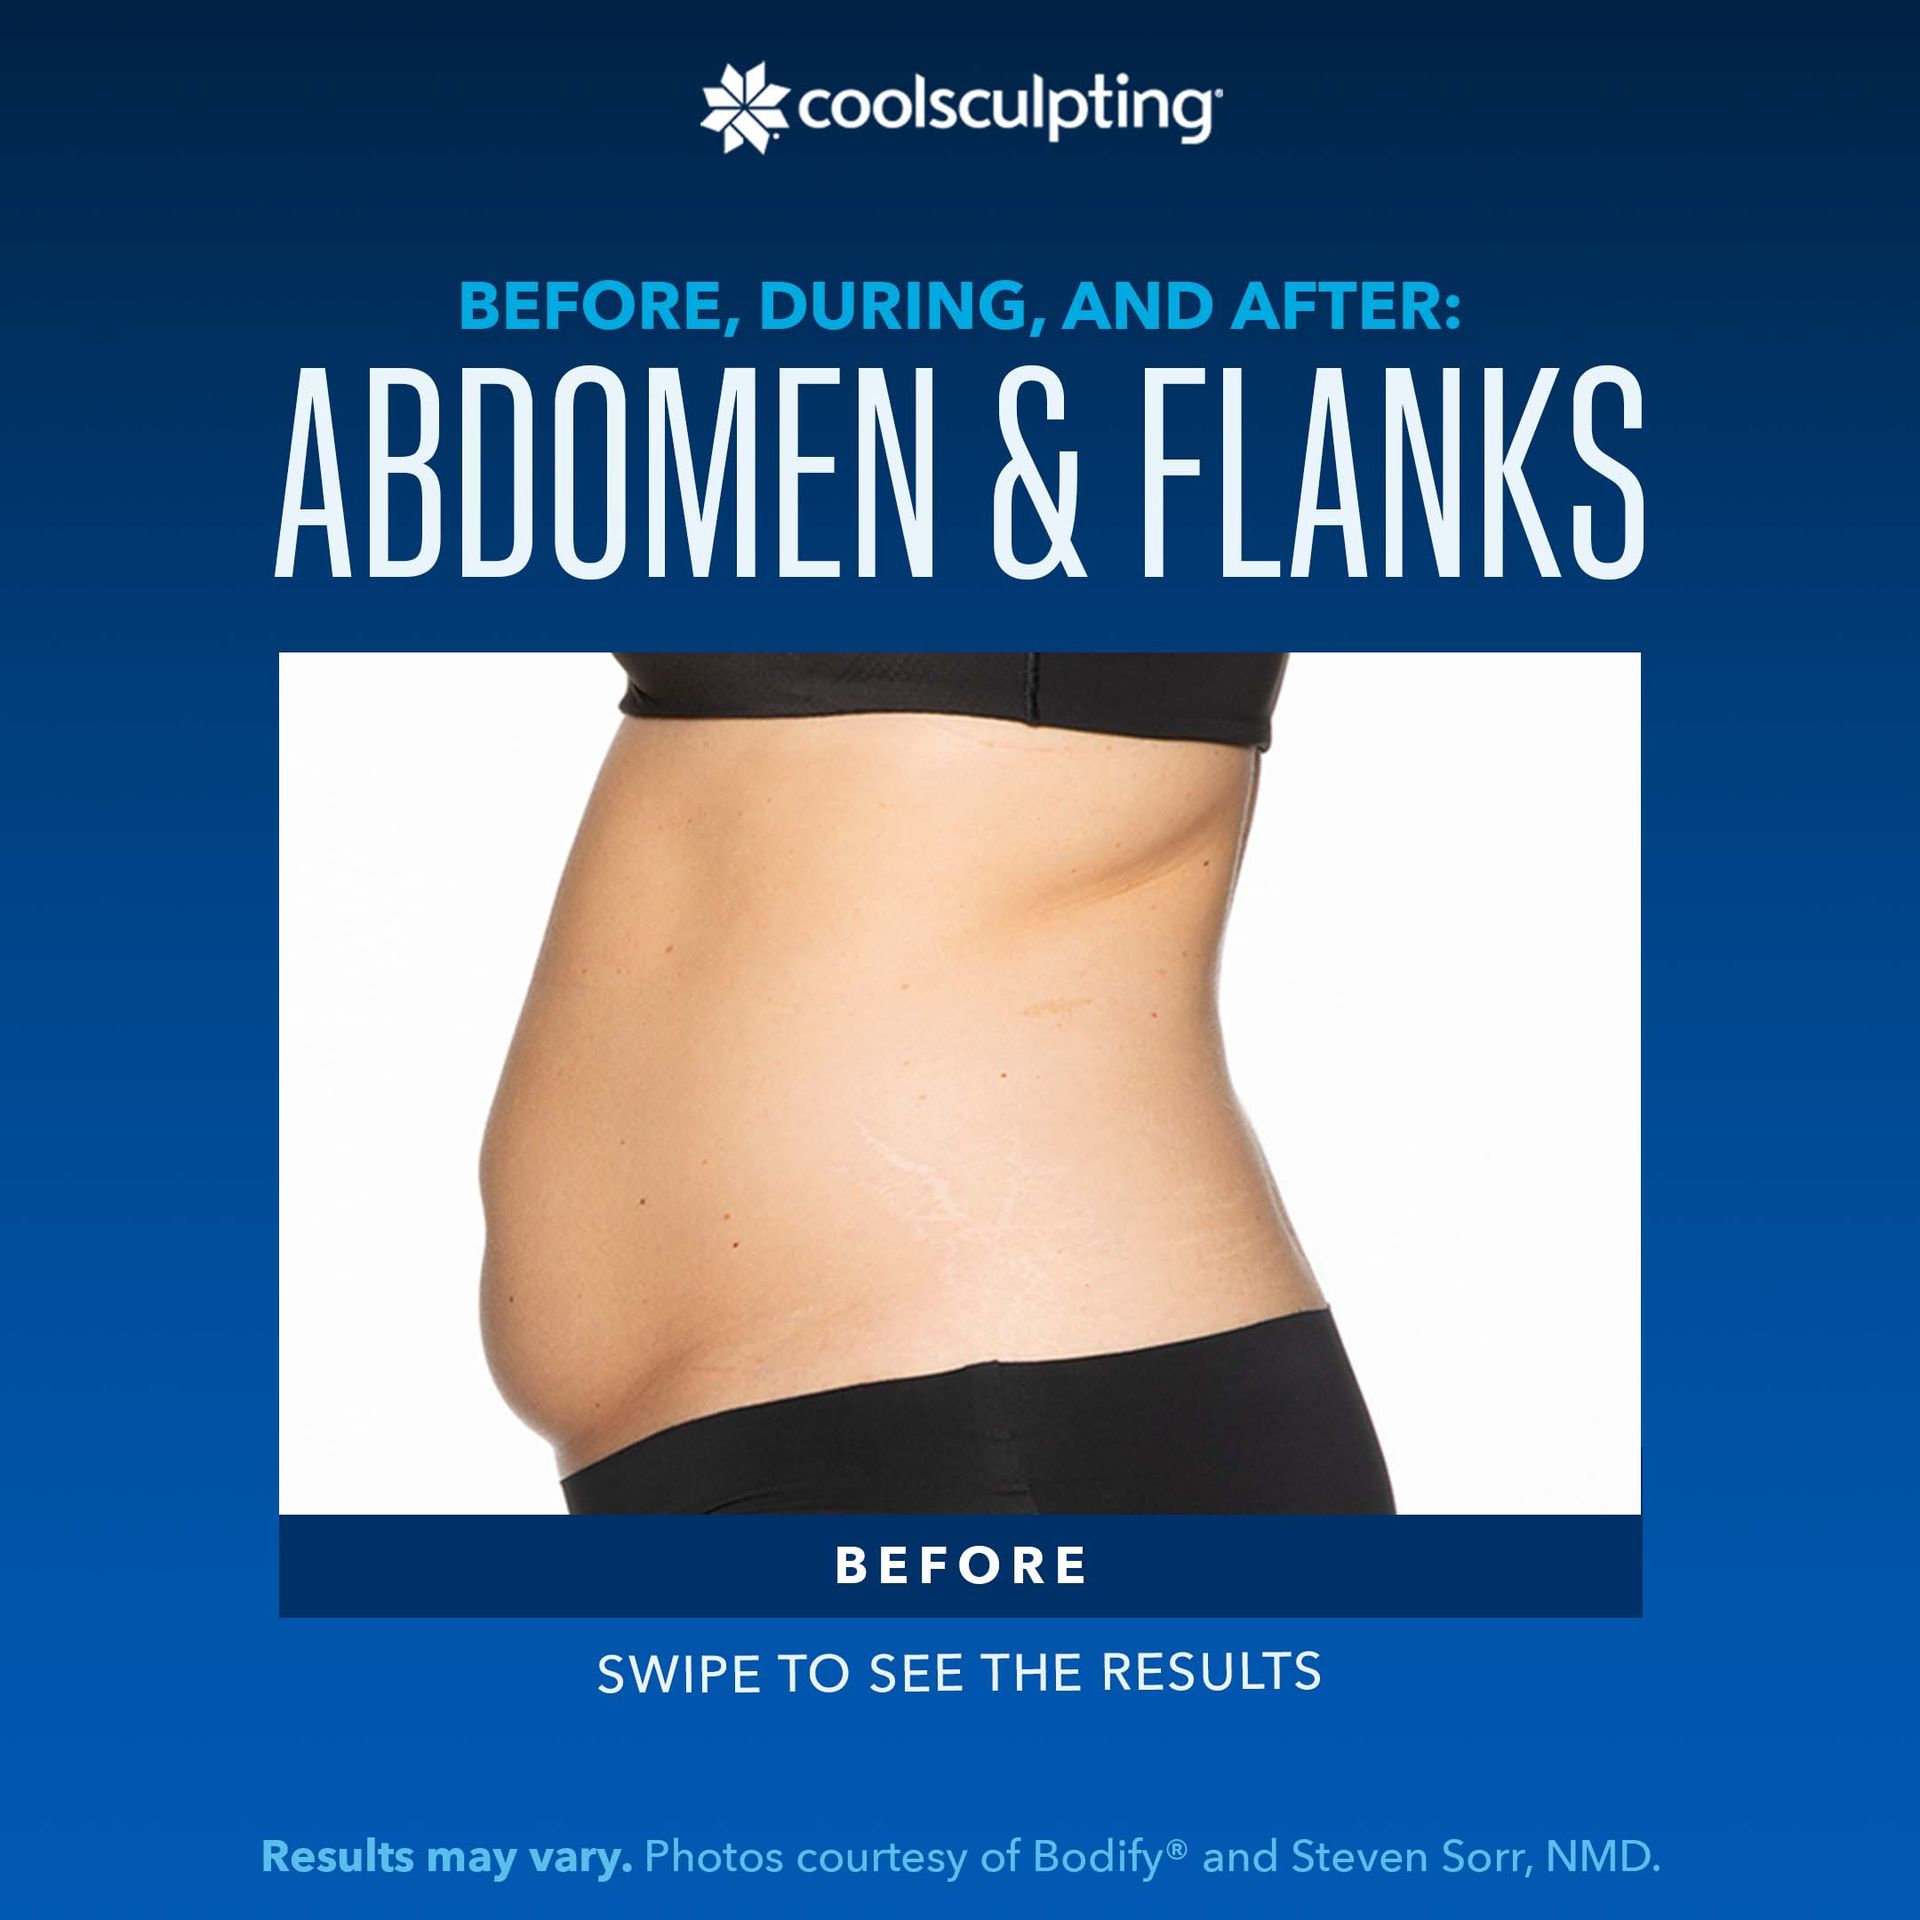 a before picture of a woman's abdomen and flanks for coolsculpting treatment